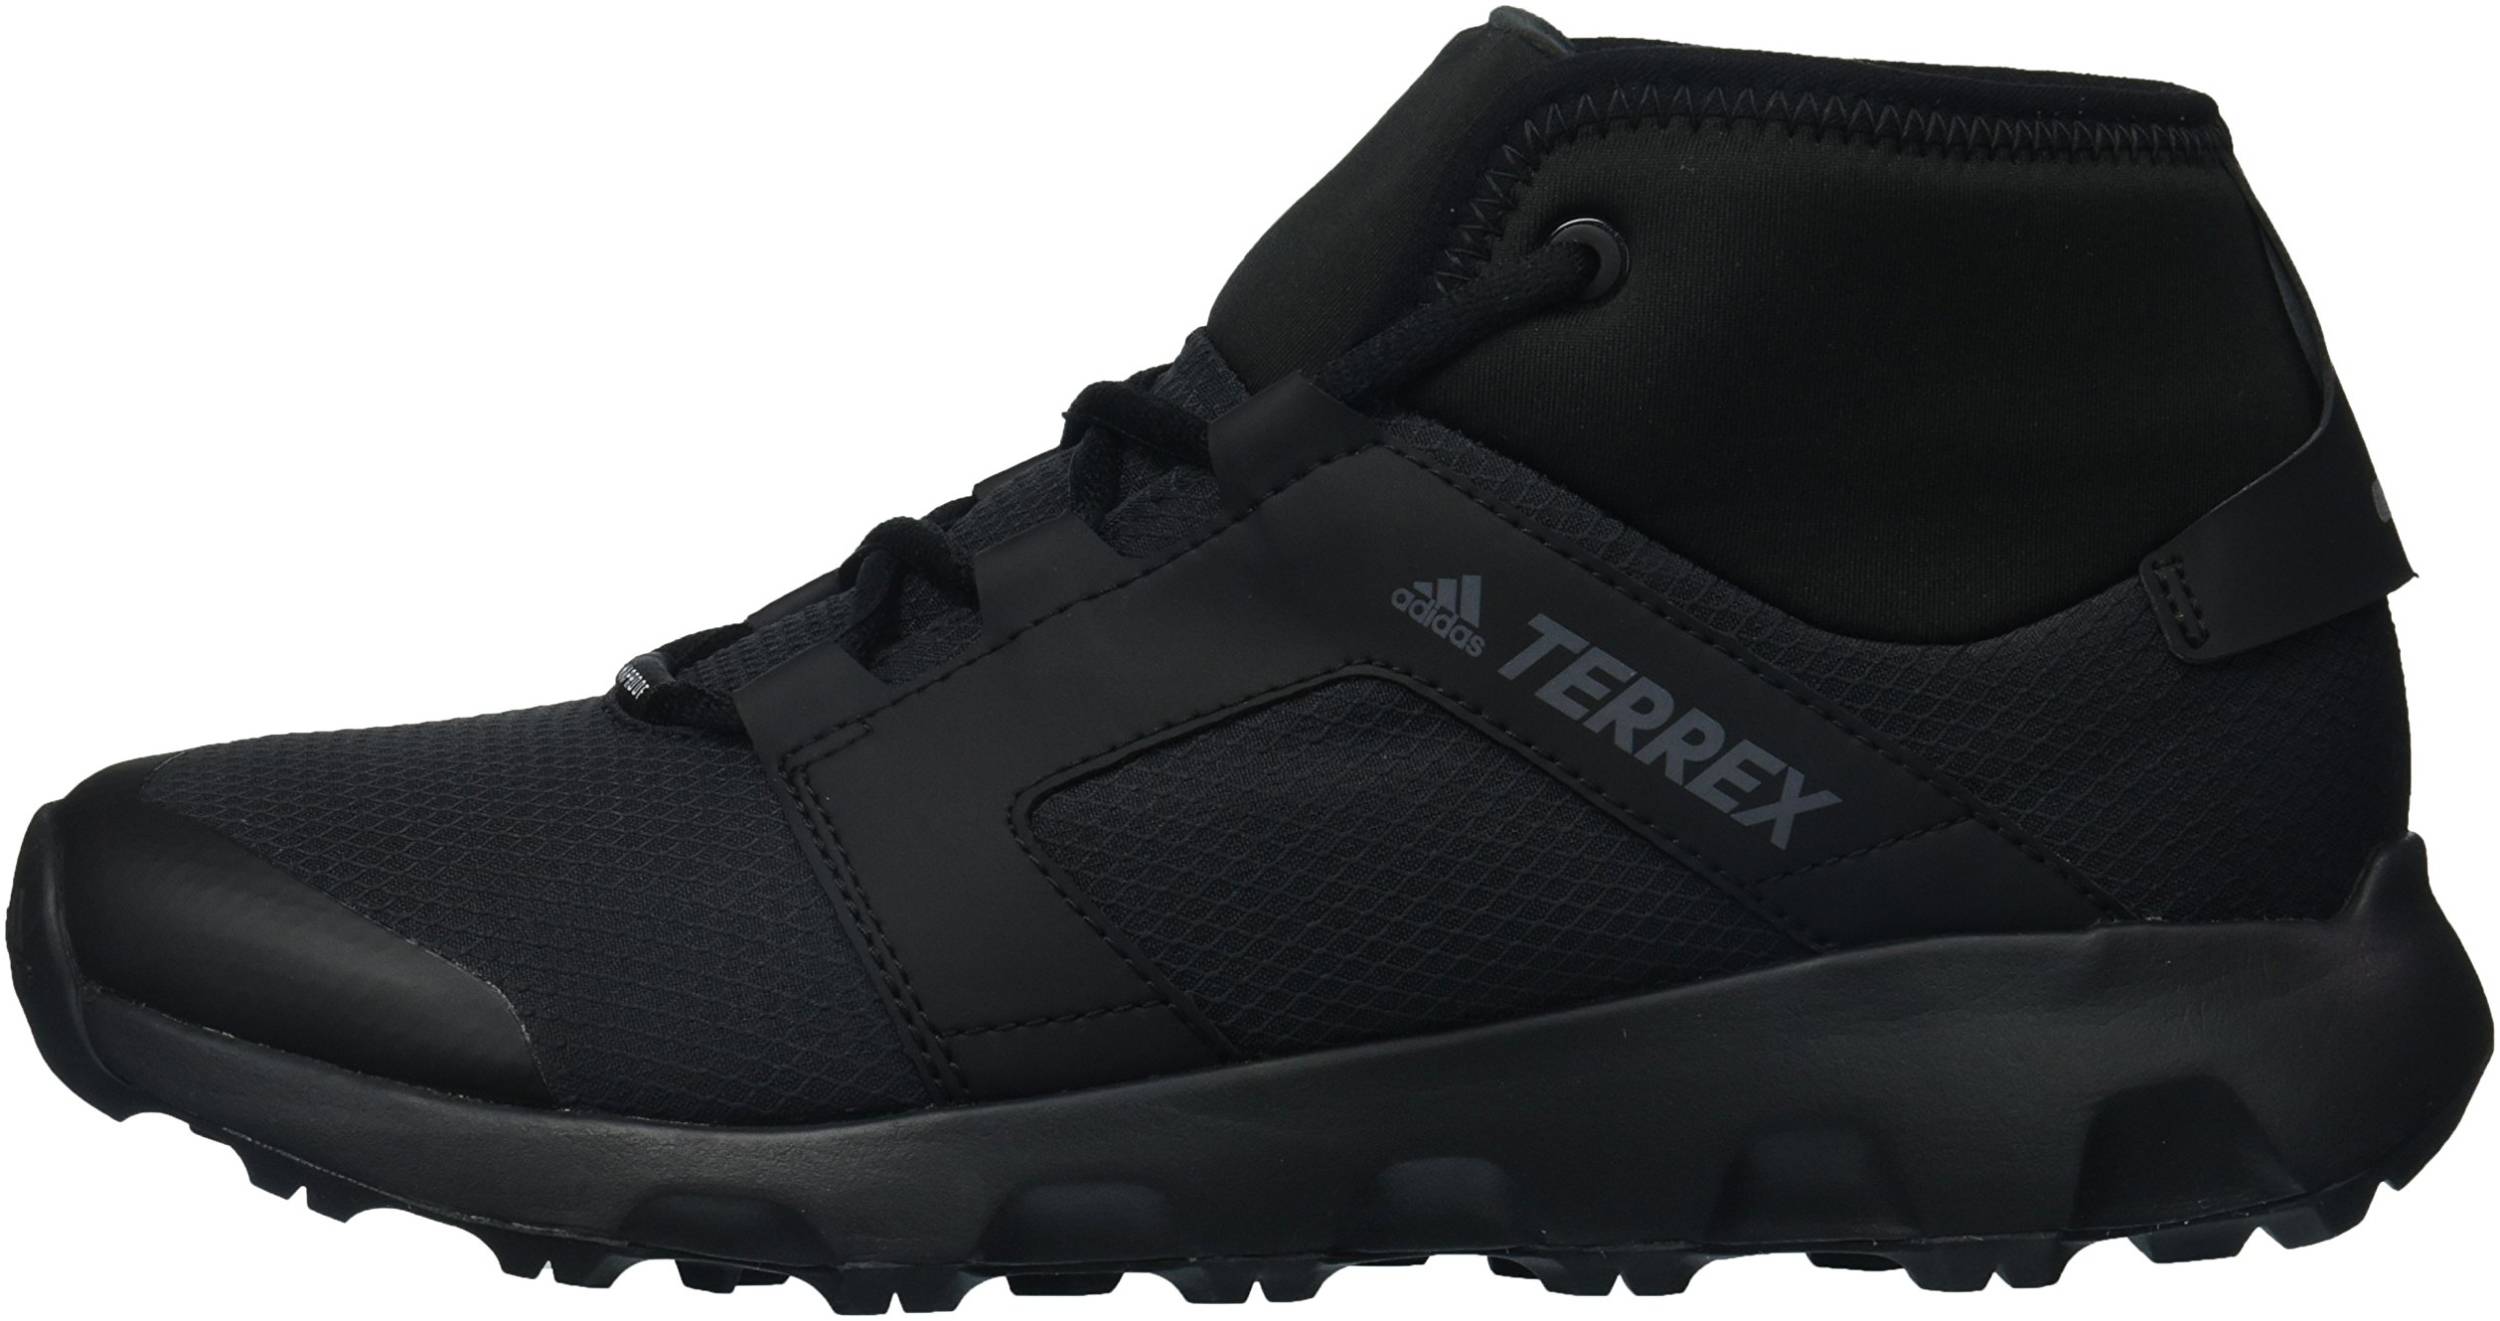 Only $70 + Review of Adidas Terrex Voyager CW CP | RunRepeat